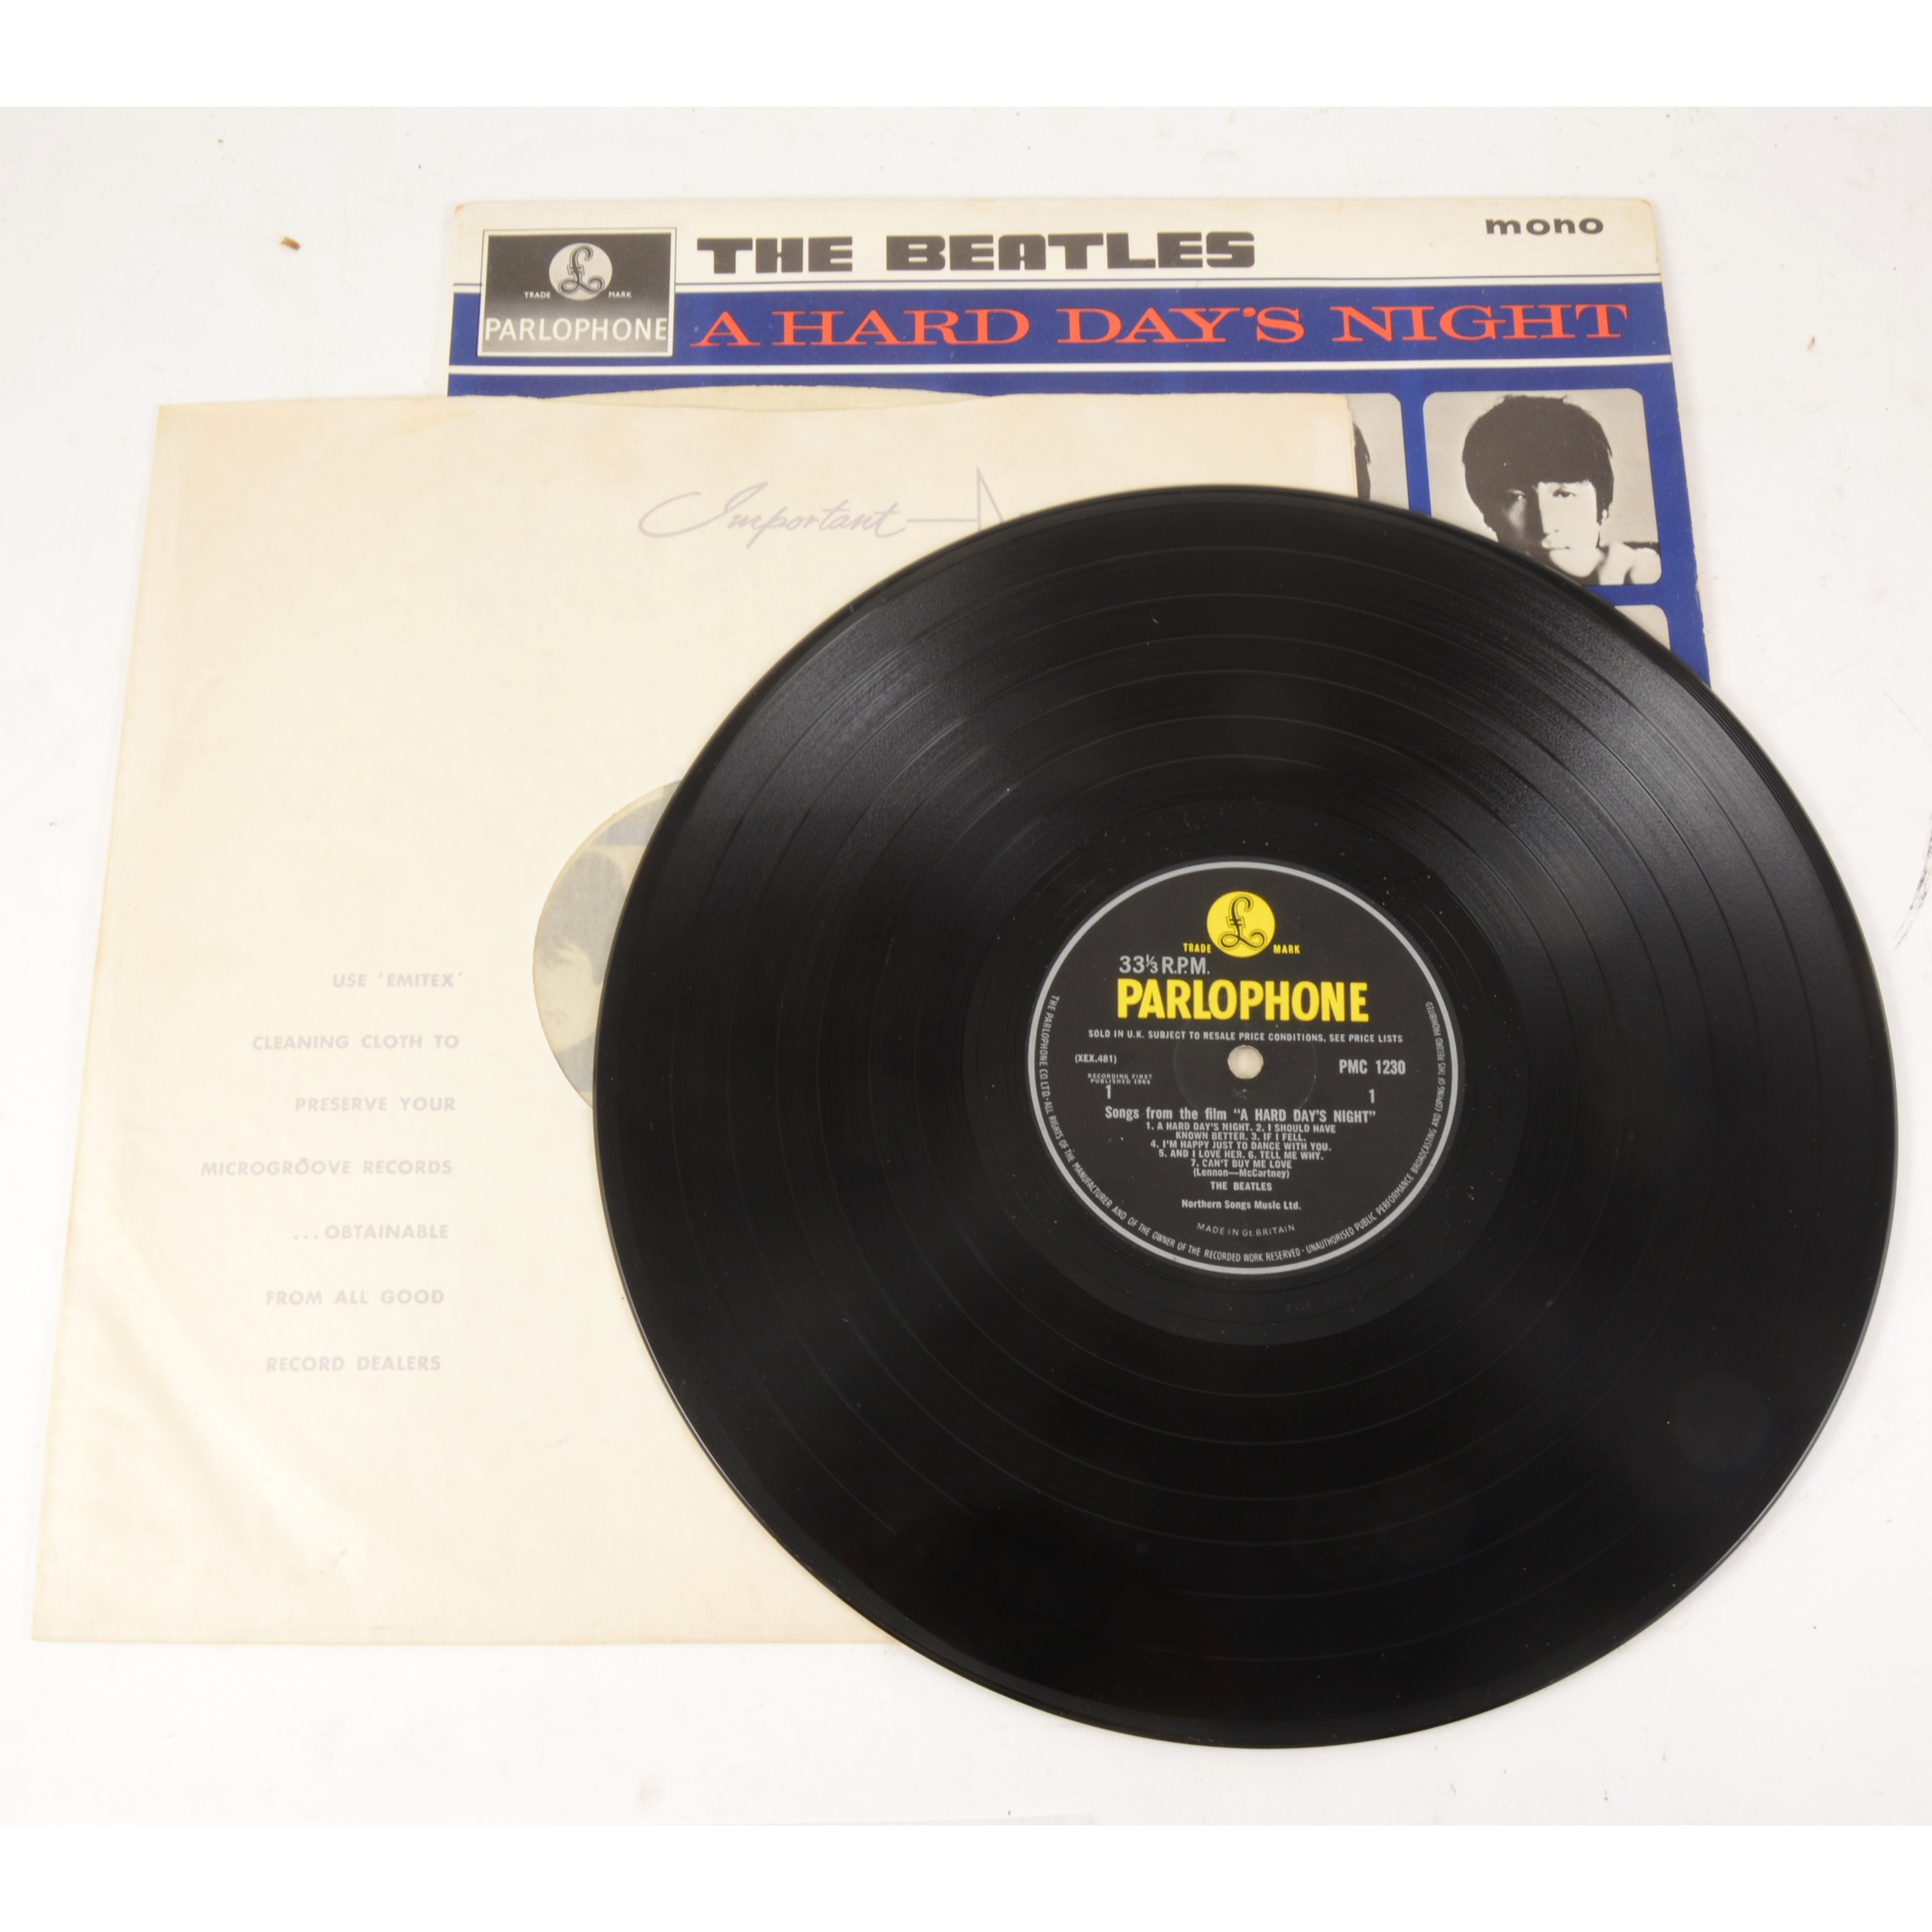 The Beatles A Hard Day's Night LP vinyl record; Mono first pressing PMC 1230 matrix 481-3N/482-3N, - Image 3 of 3